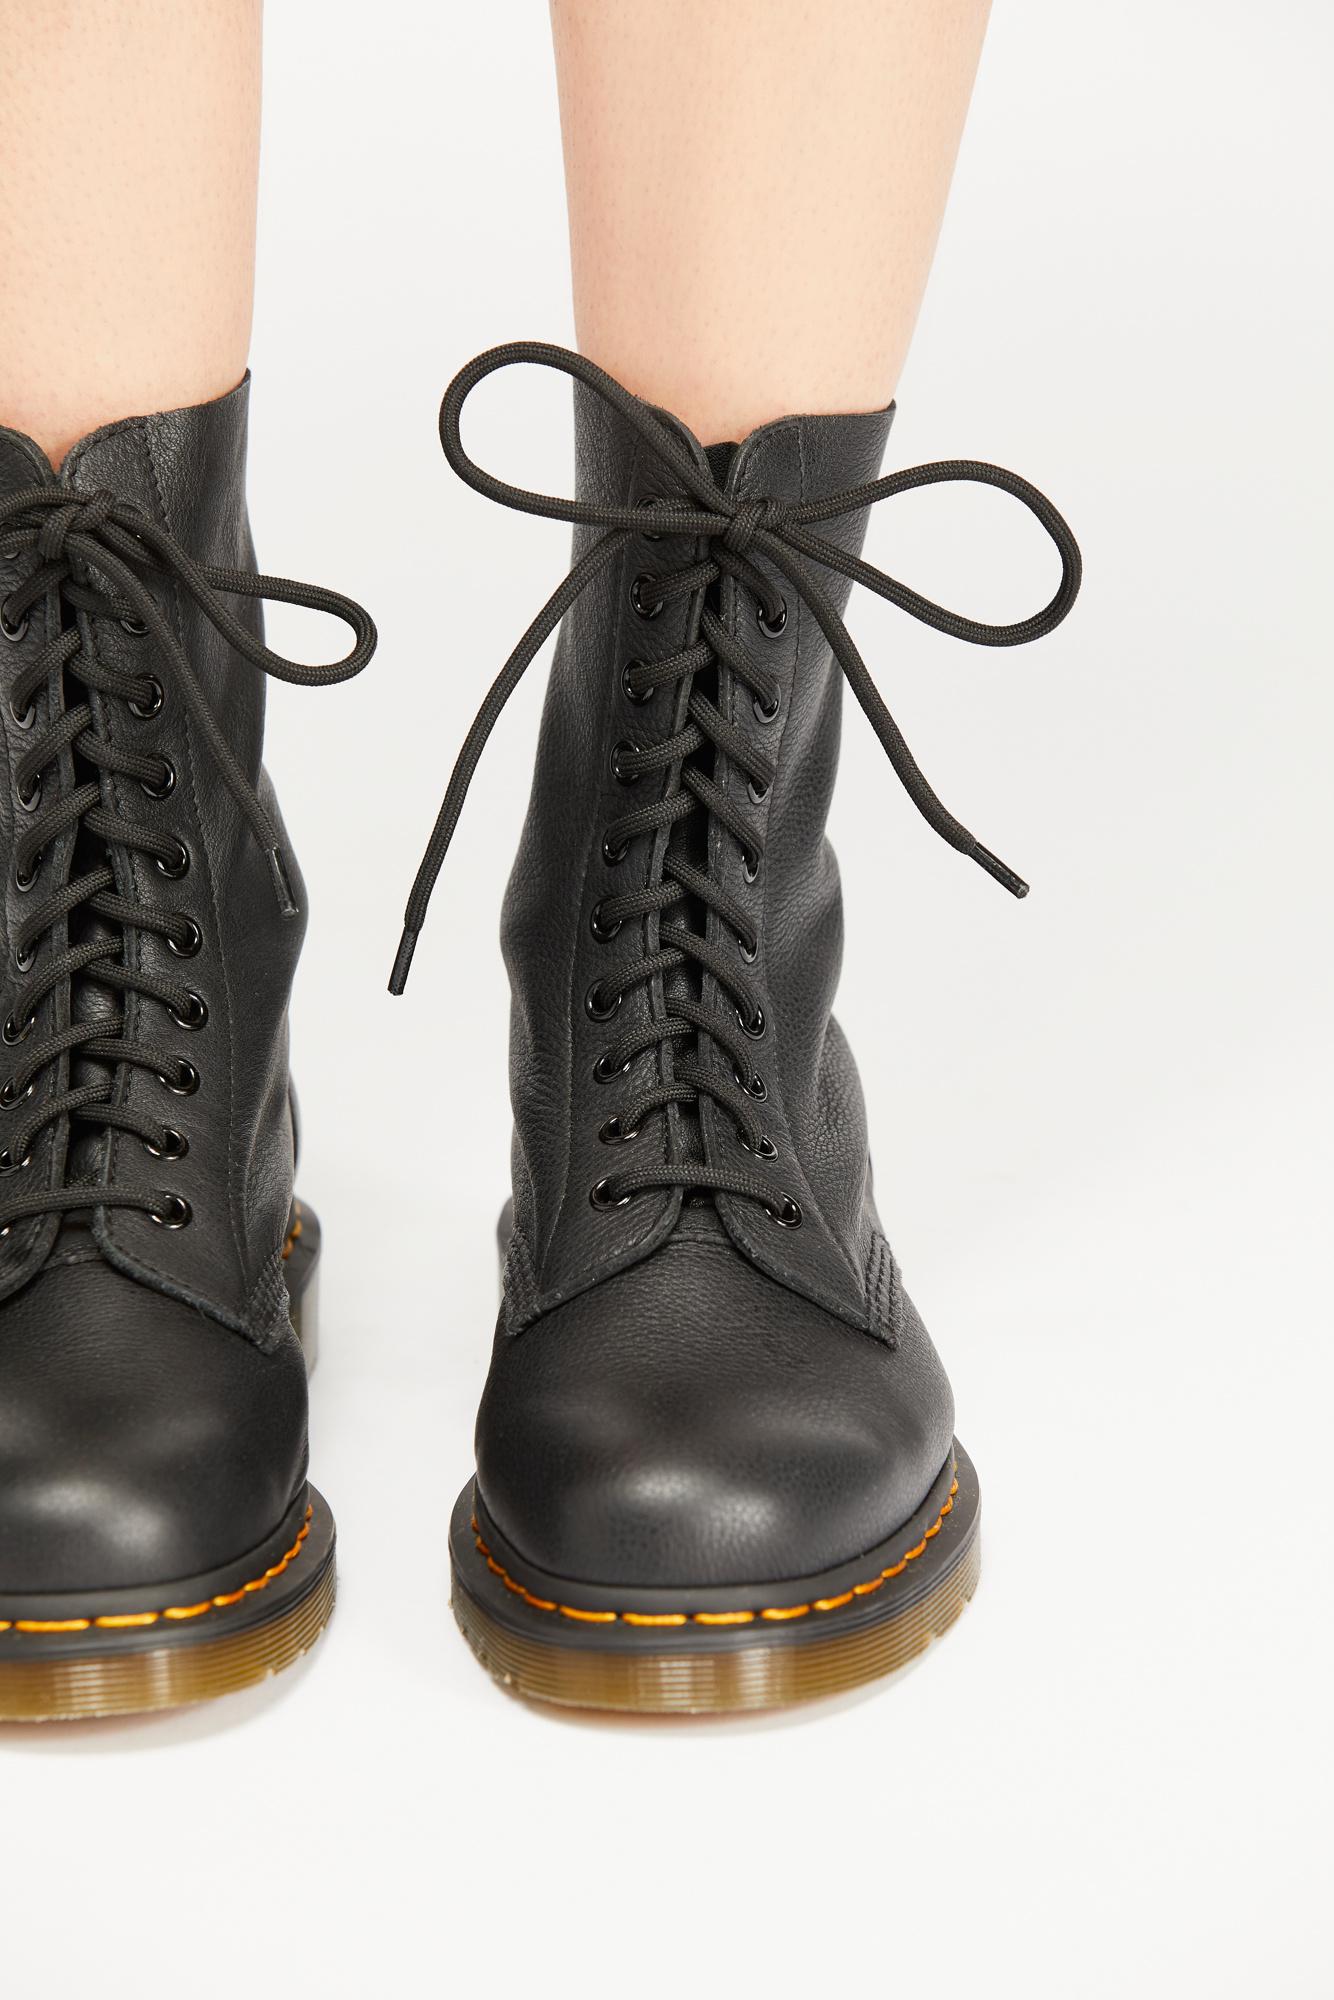 Dr Martens 10 Eye Outlet Offers, 47% OFF | maikyaulaw.com